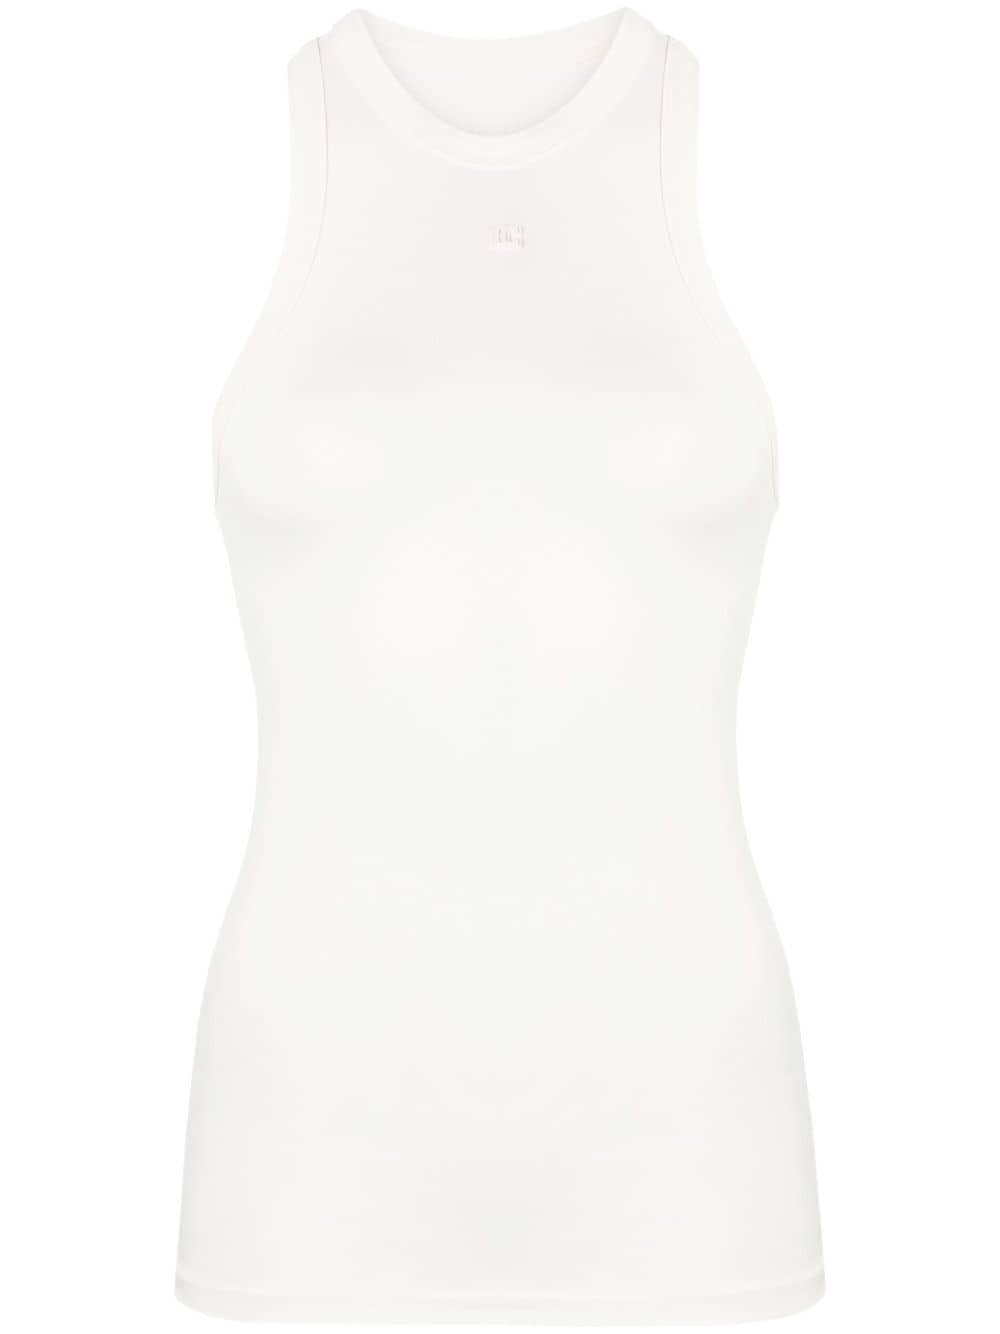 embroidered-logo sleeveless top - 1